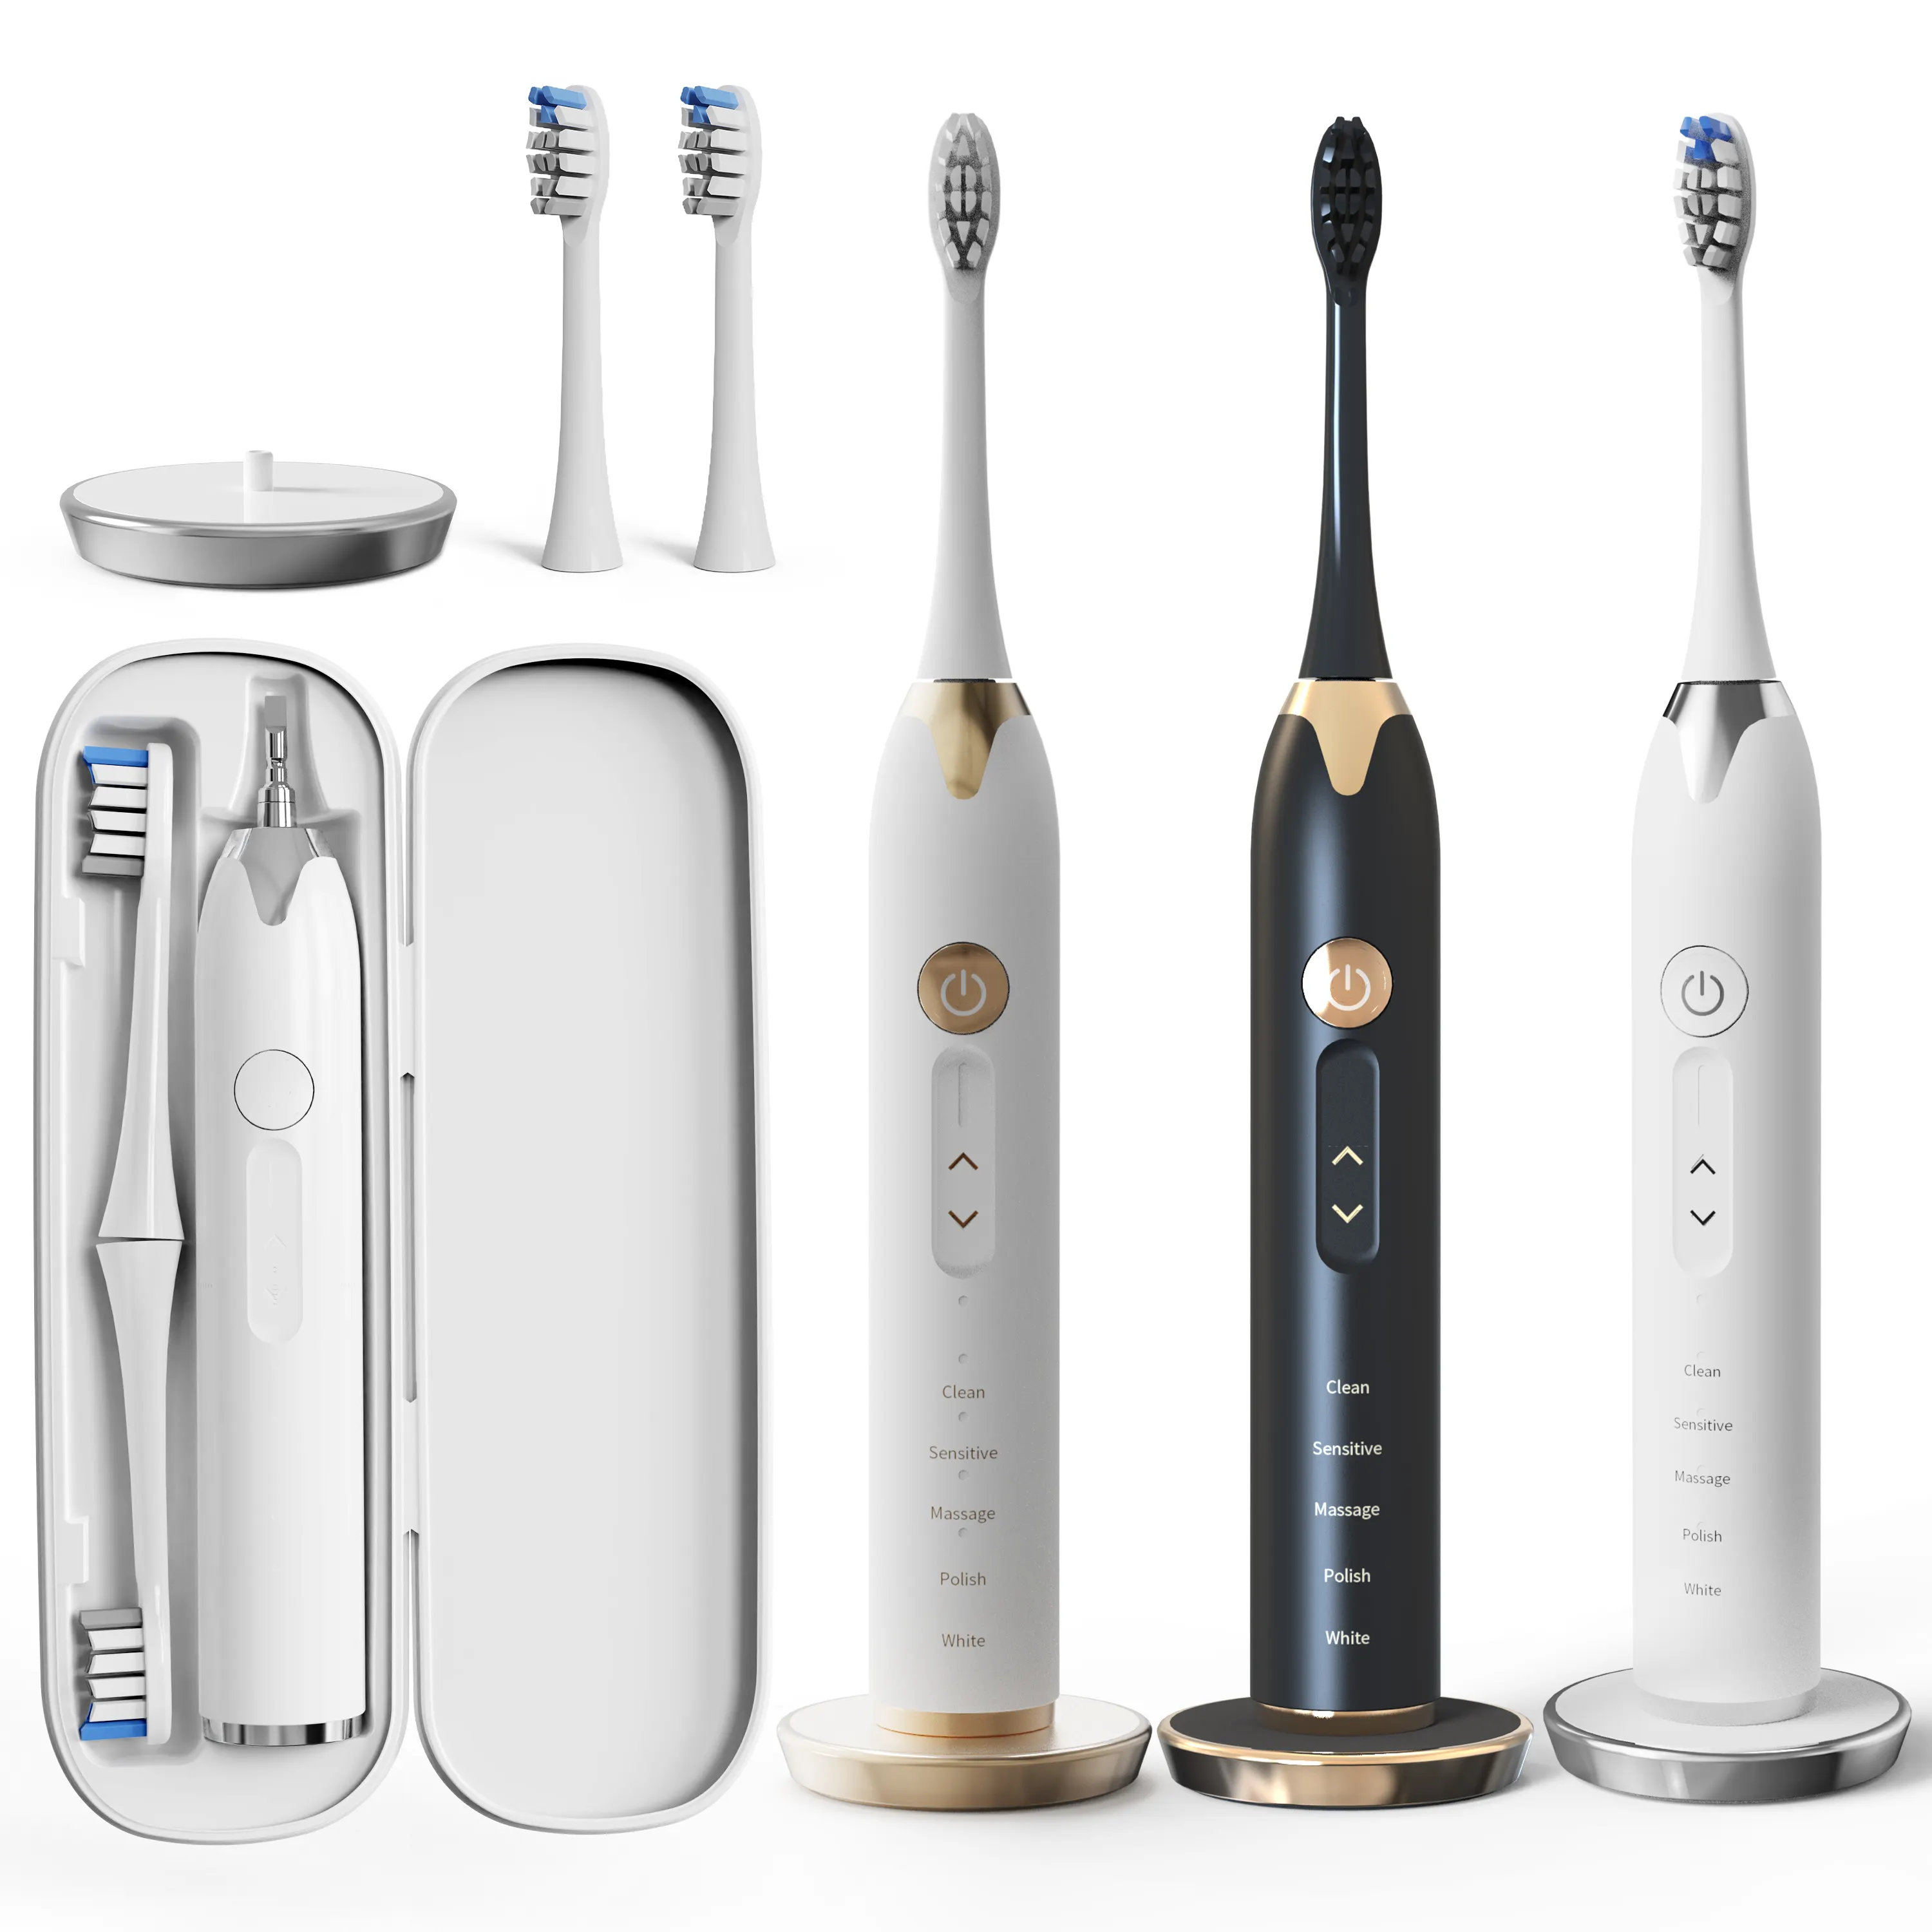 PRESSURE SENSOR and TOUCH CONTROL sonic electric toothbrush 48000 strokes/min electronic toothbrush travel